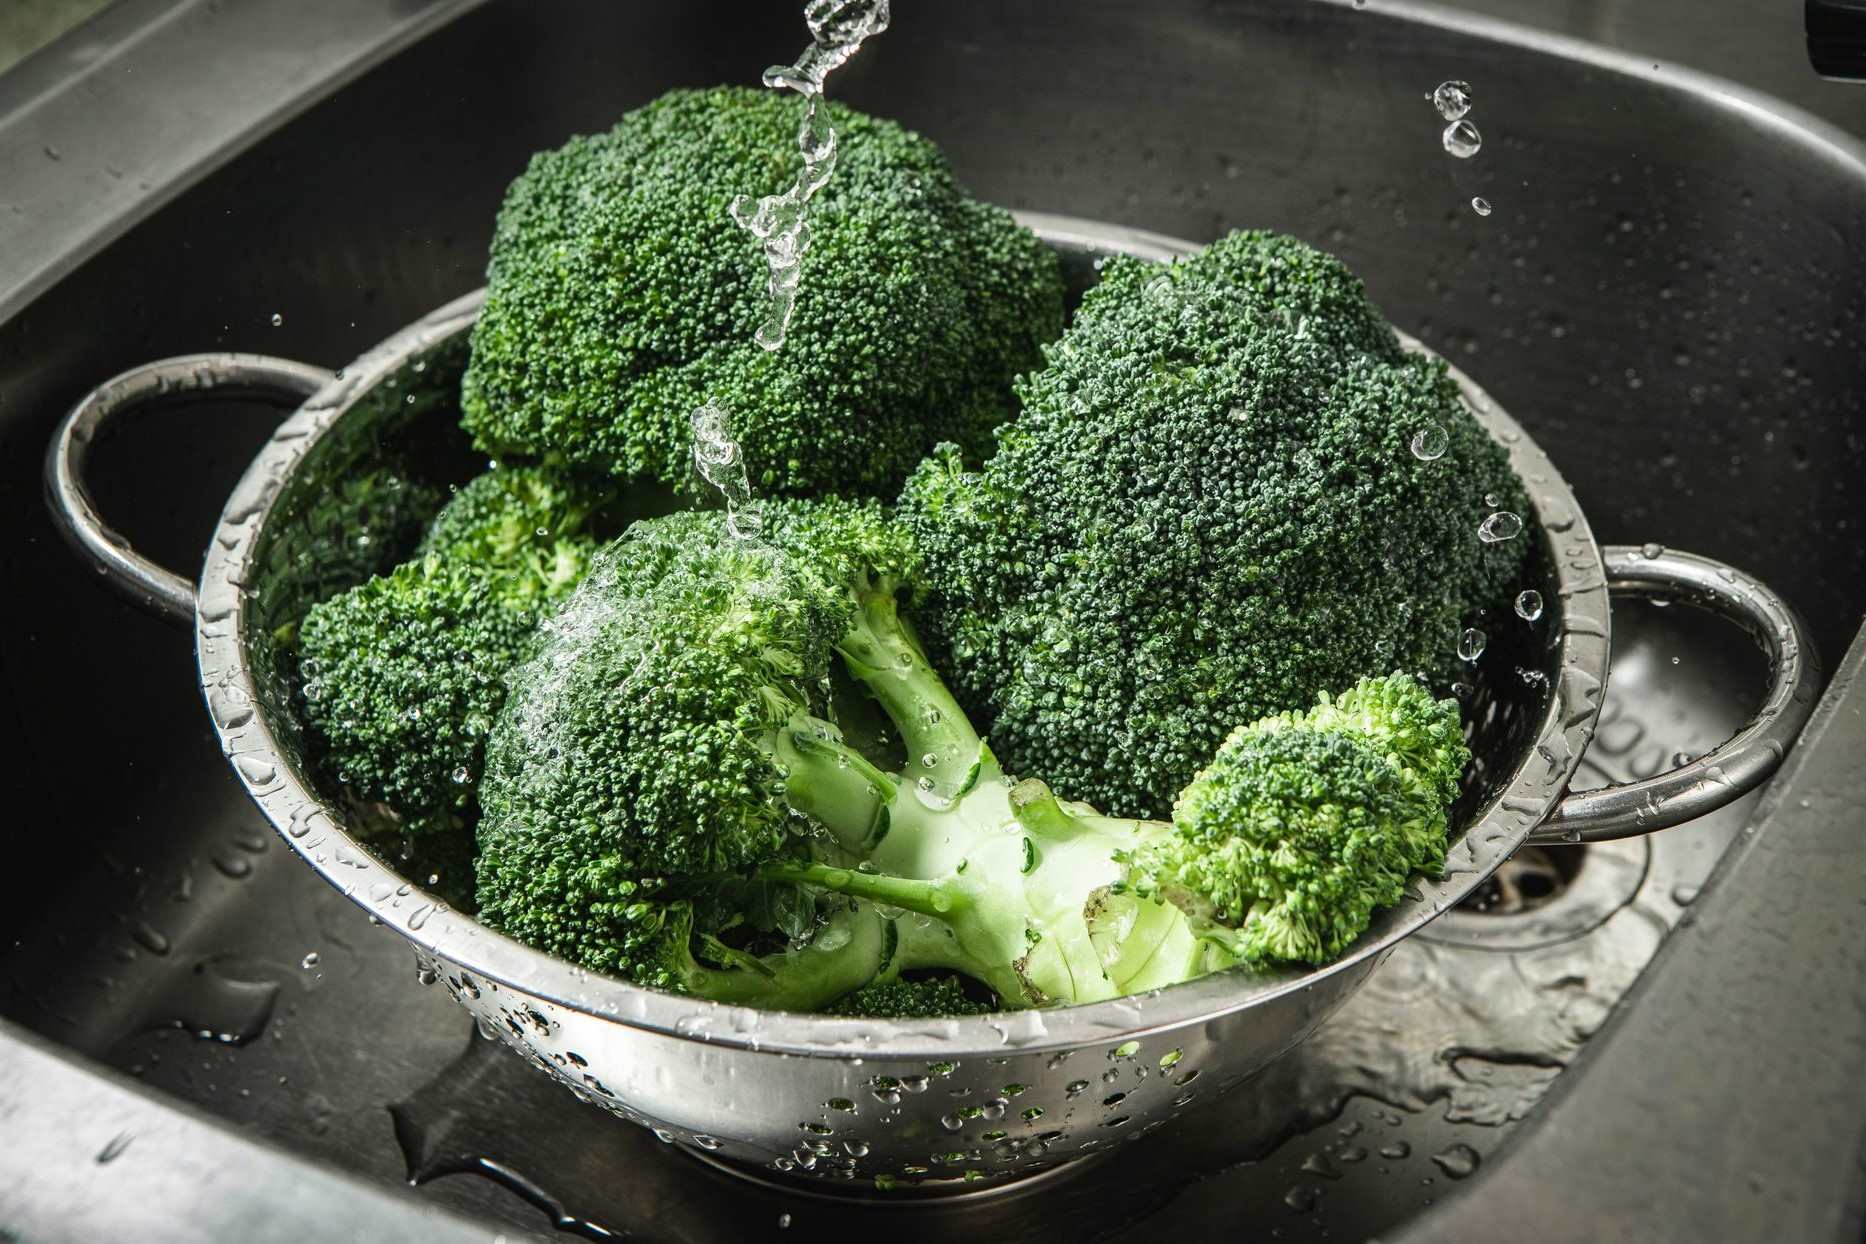 How To Clean Broccoli